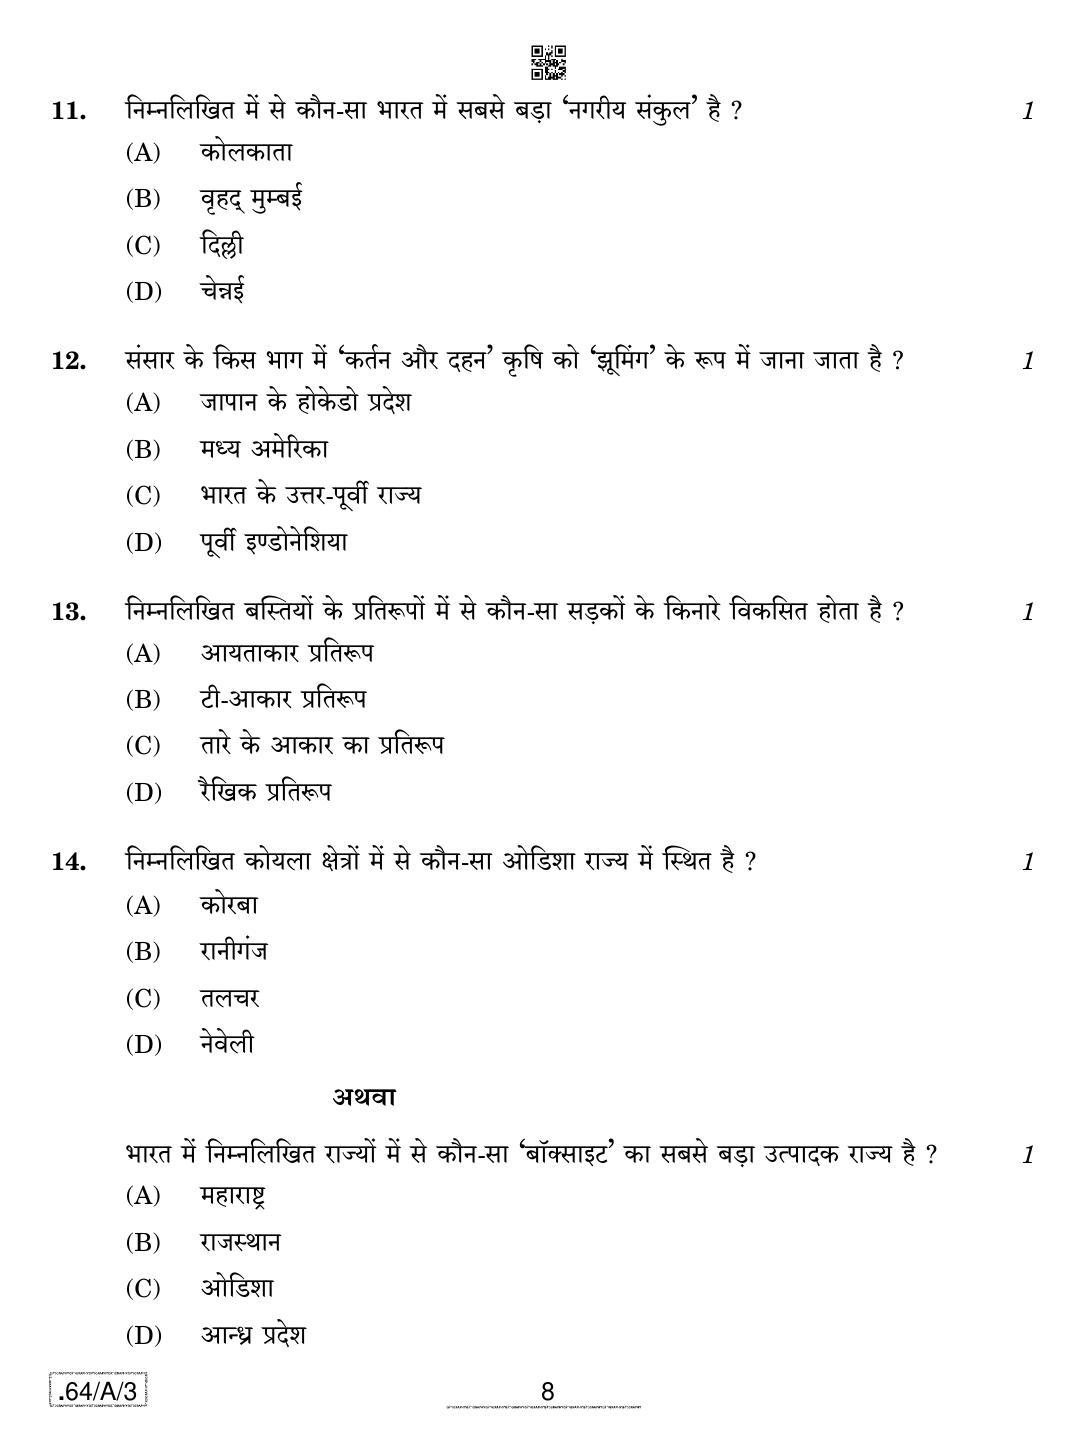 CBSE Class 12 64-C-3 - Geography 2020 Compartment Question Paper - Page 8